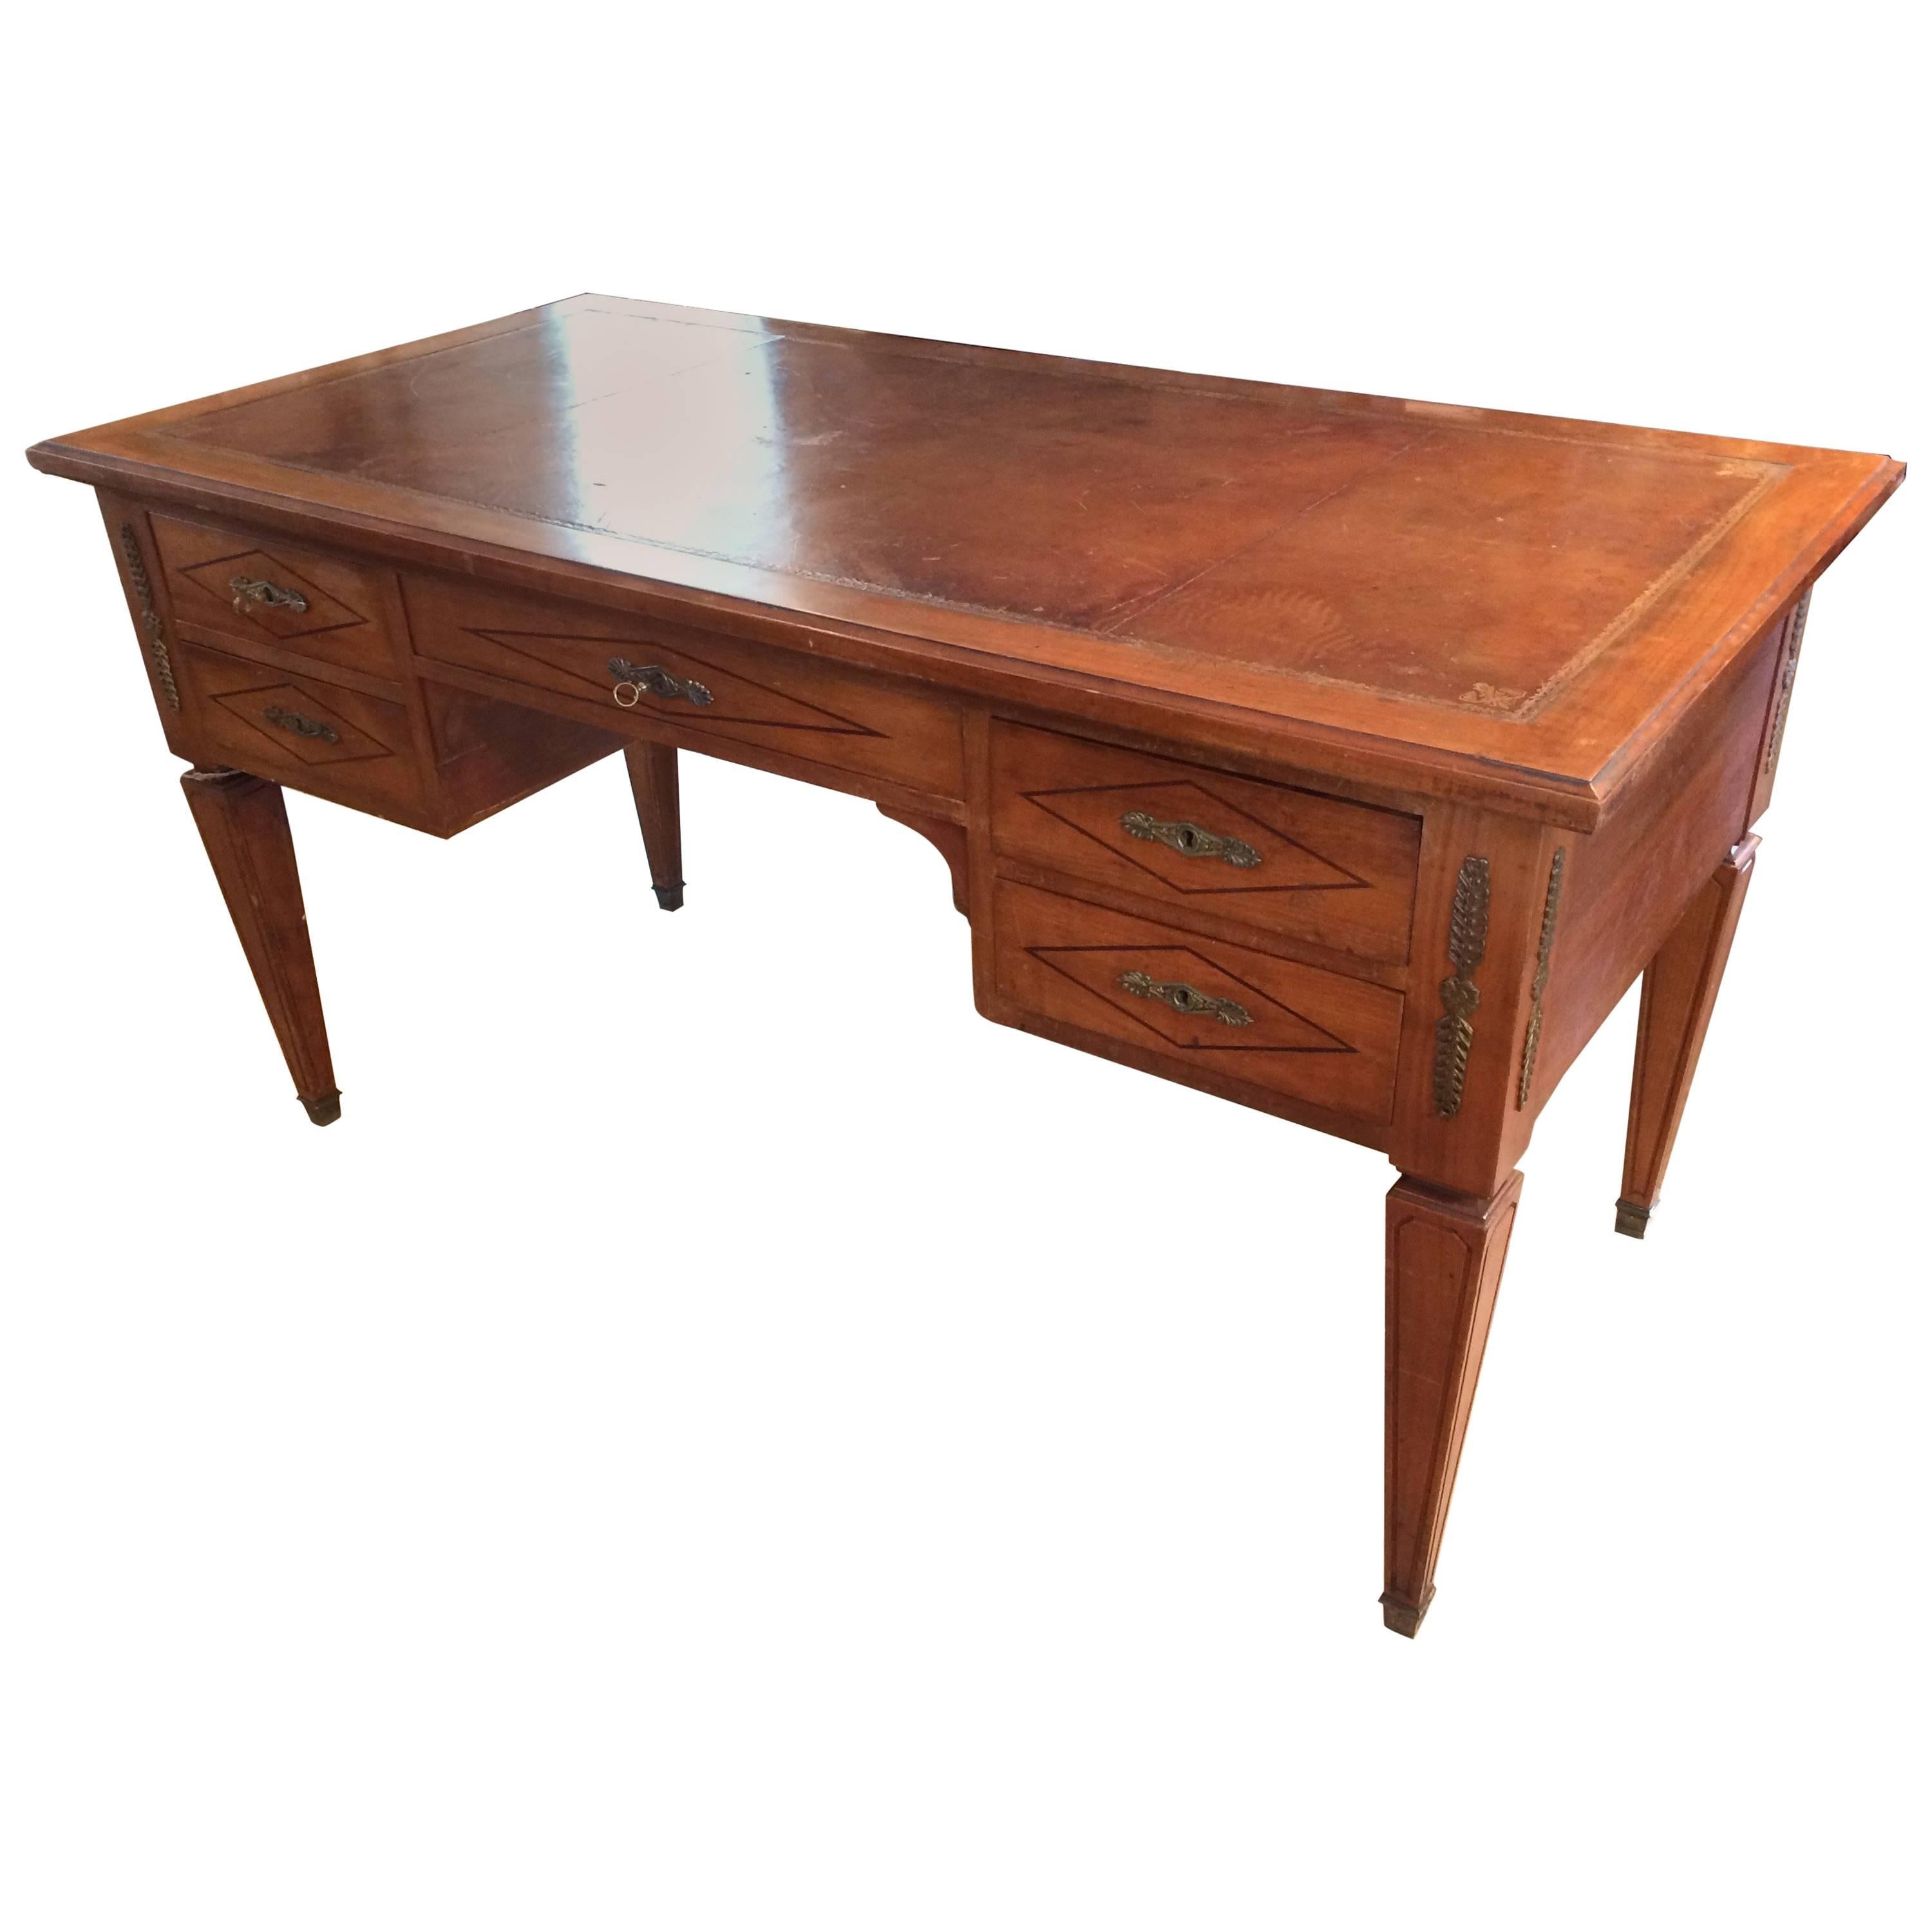 Exquisite Antique French Partners Desk with Tooled Leather Top